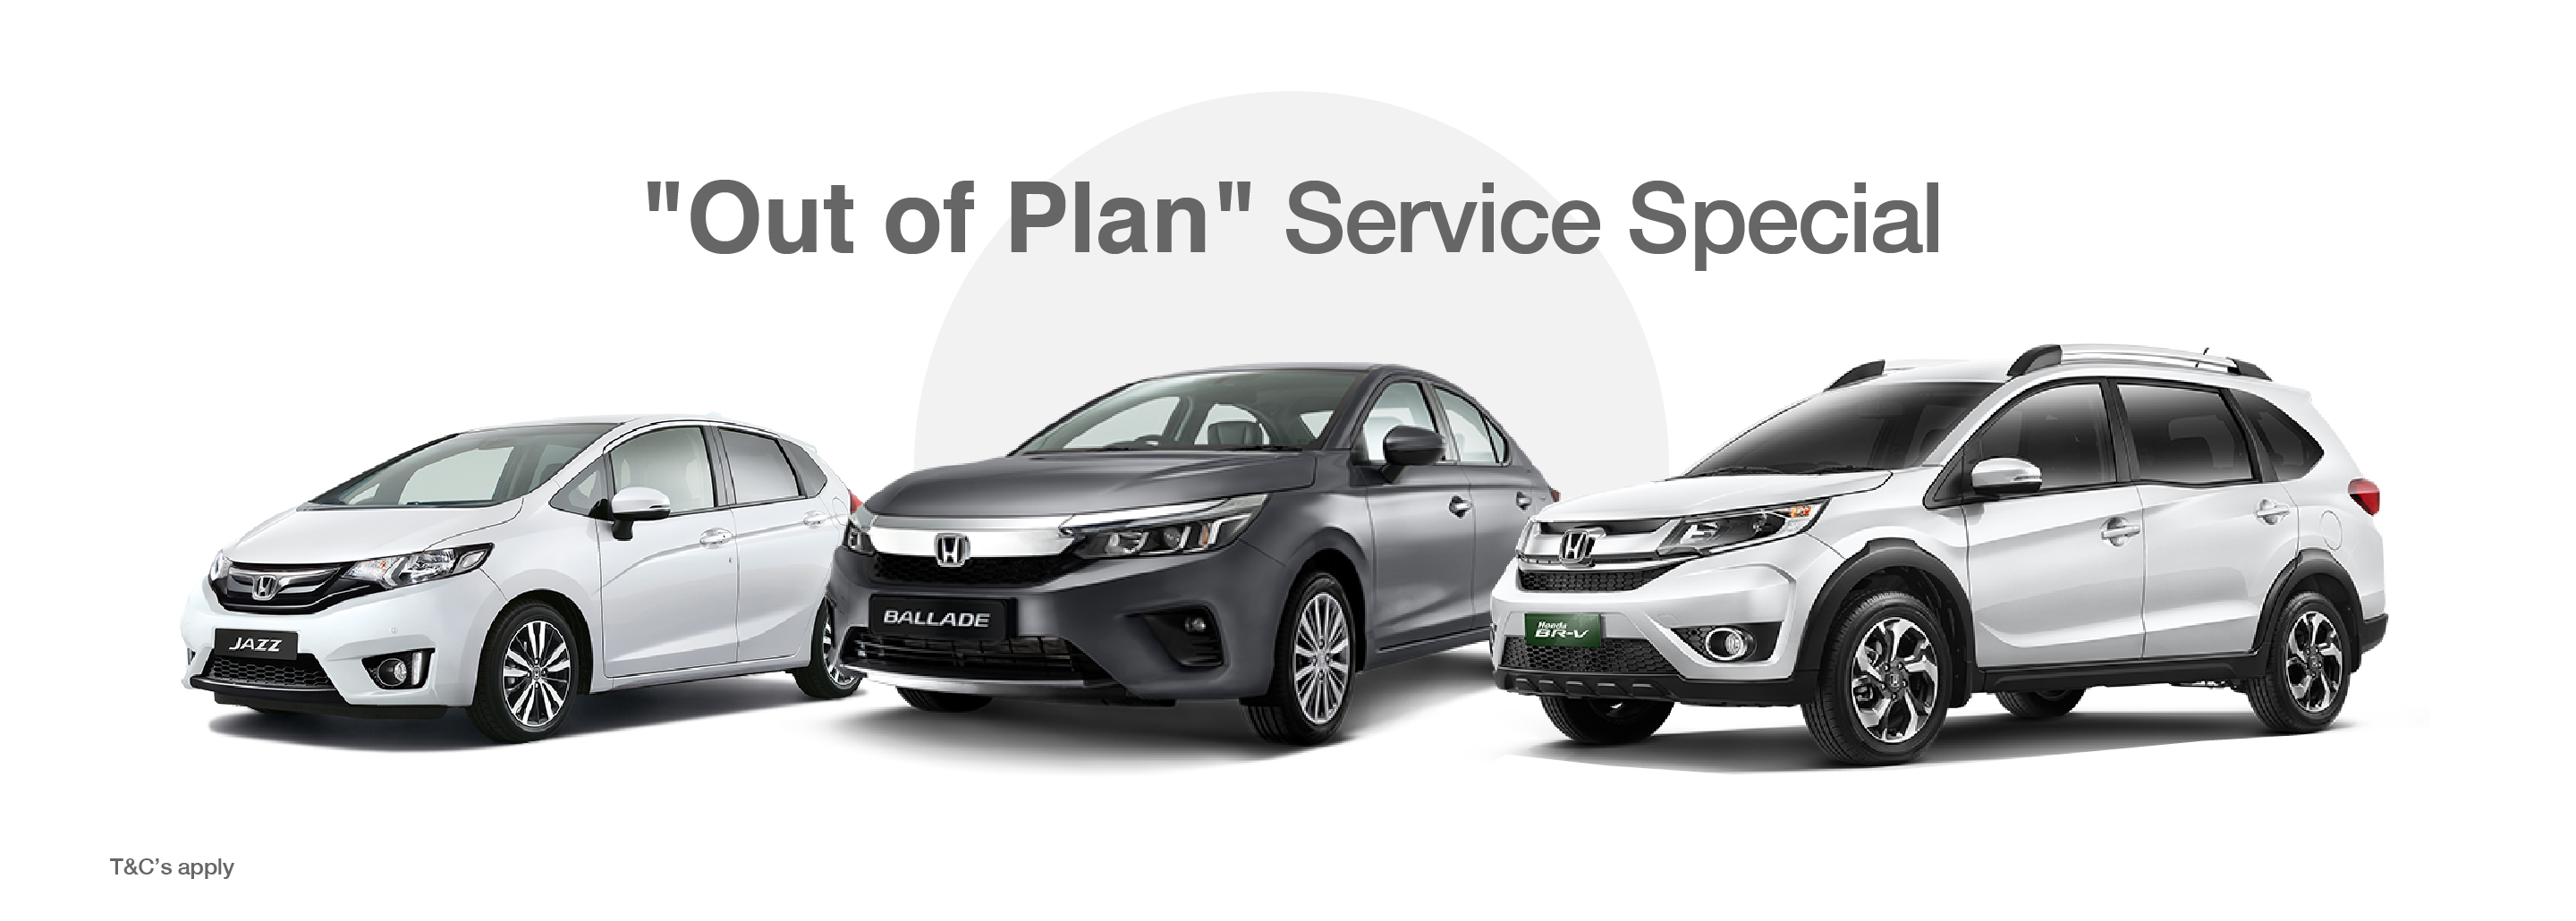 Out of Plan Service Special banner